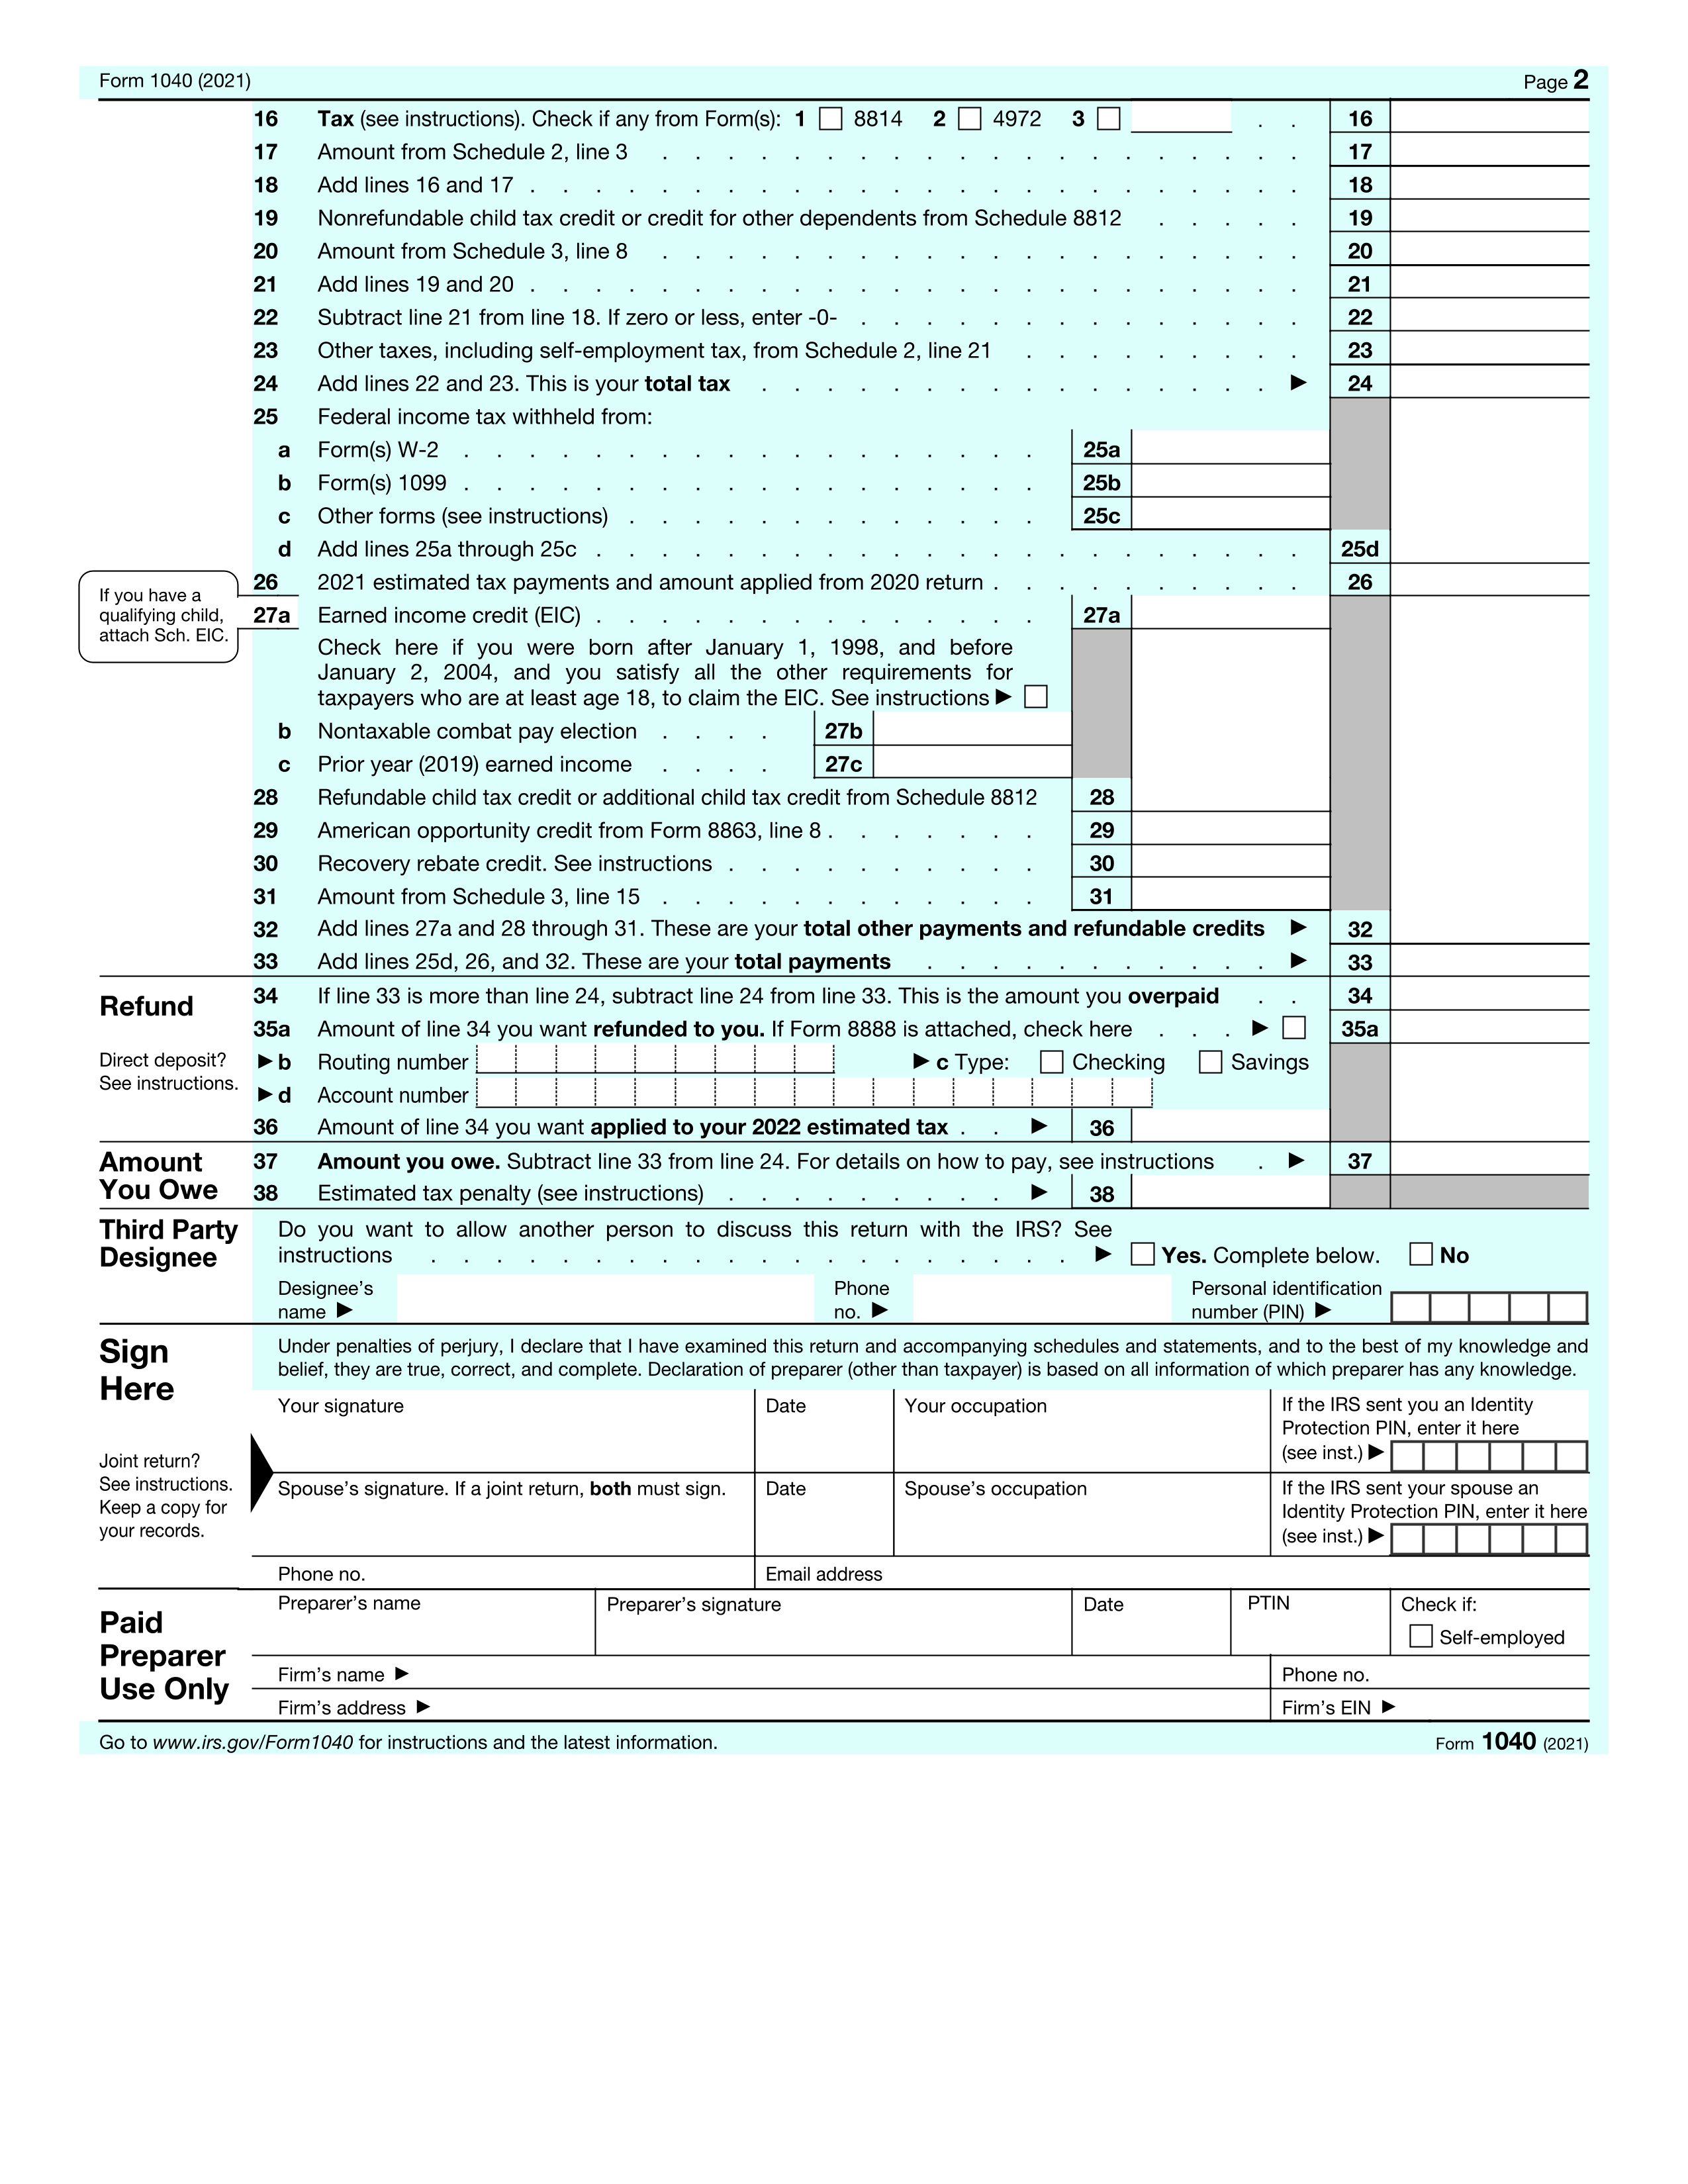 Form 1040 page 2